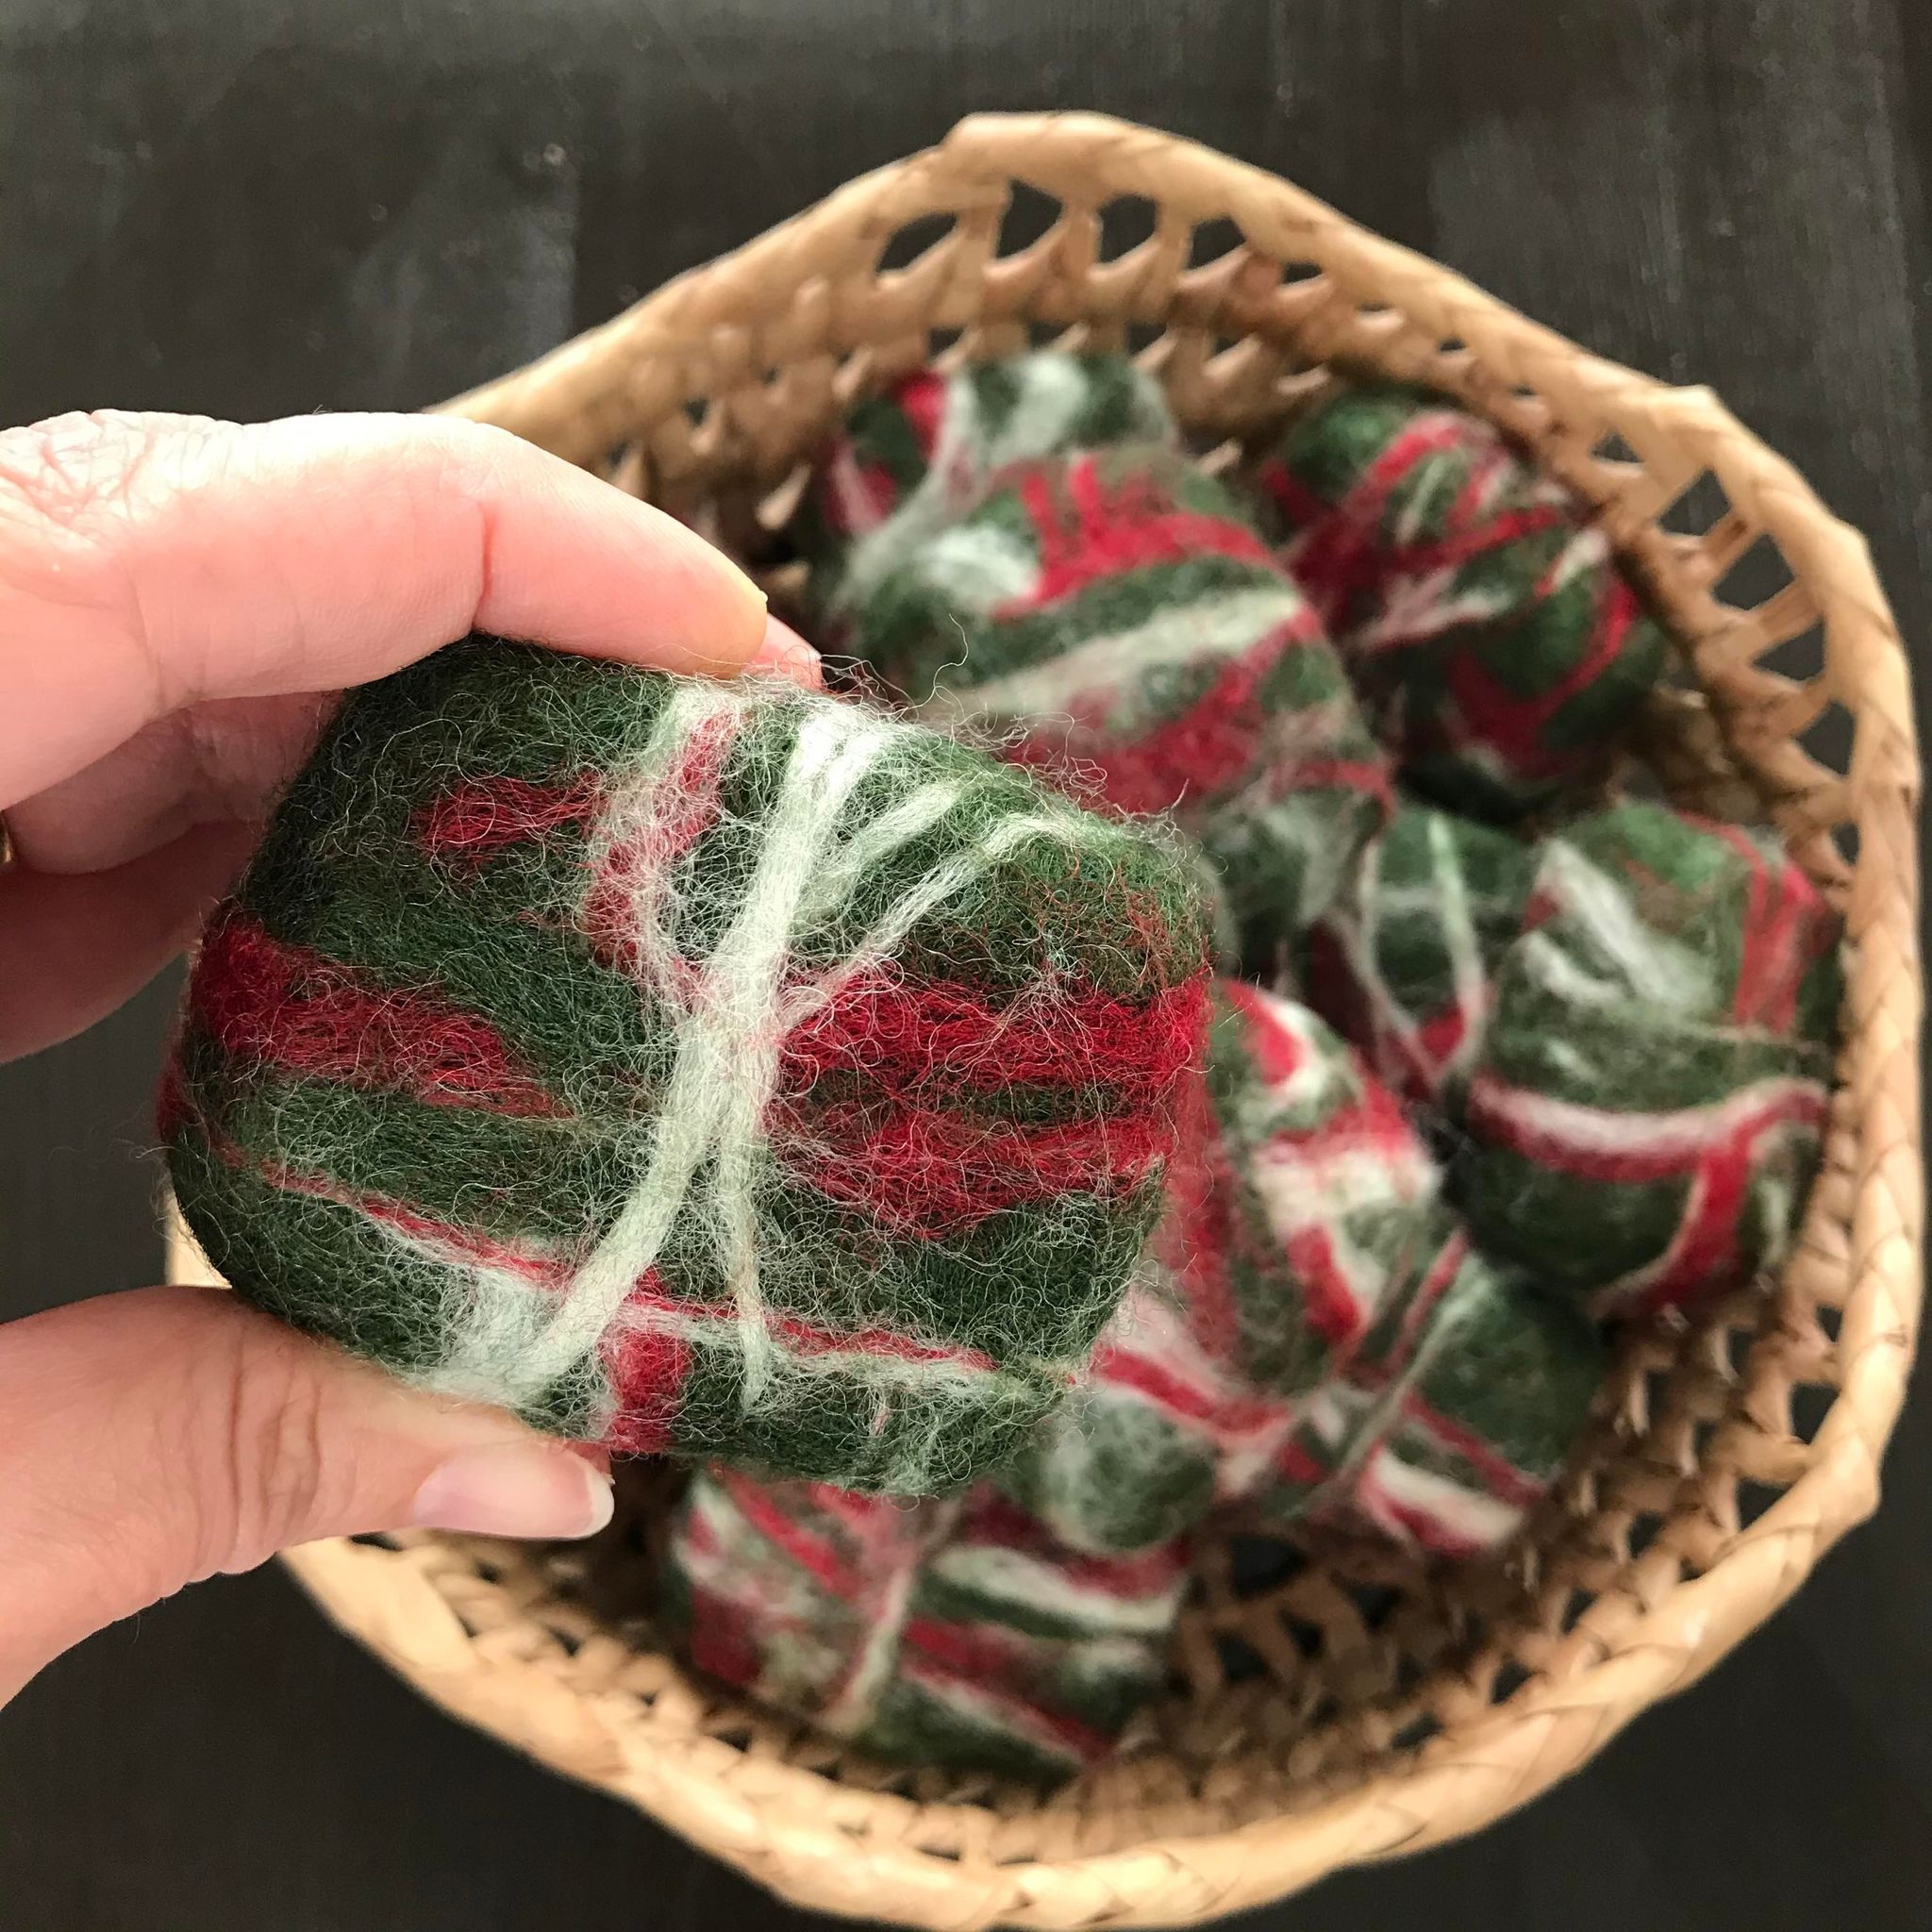 A basket of cedar fir wine guest soaps made in Canada by Simply Natural Canada and  hand felted in shades of red, white and green